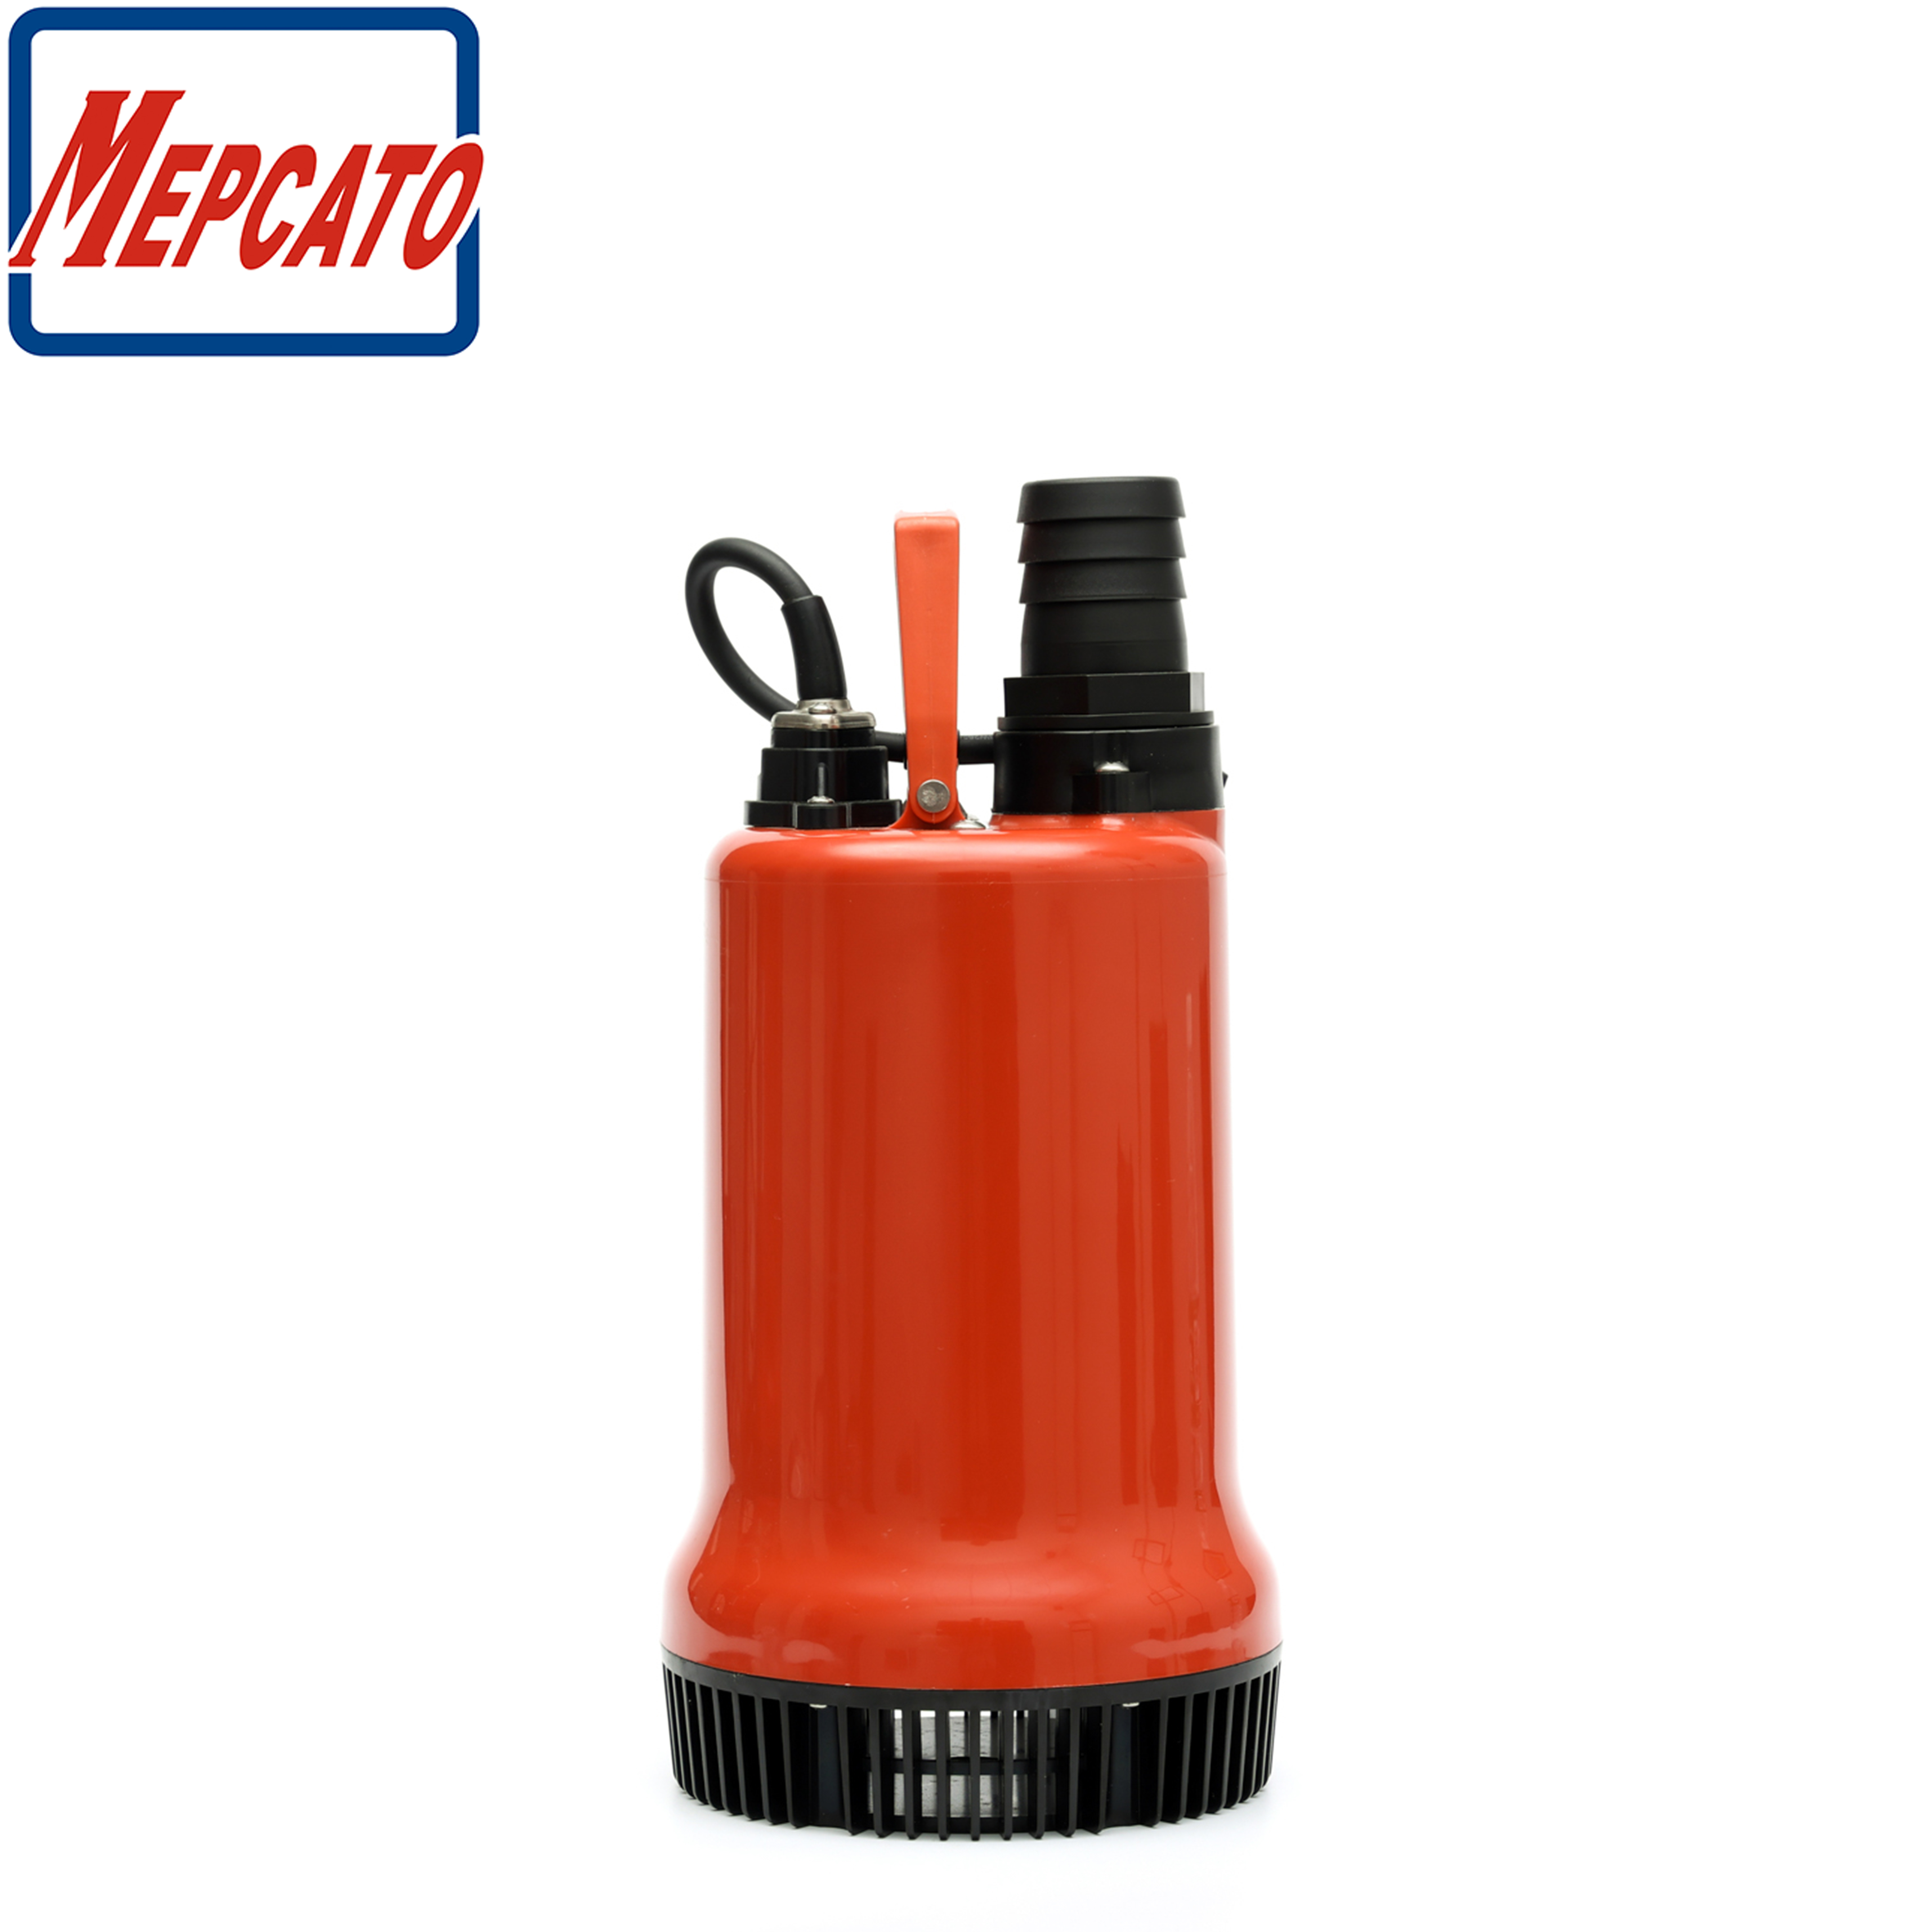 Fishpond Aquaculture Sea Water Supply Electric Plastic Utility Submersible Water Pump